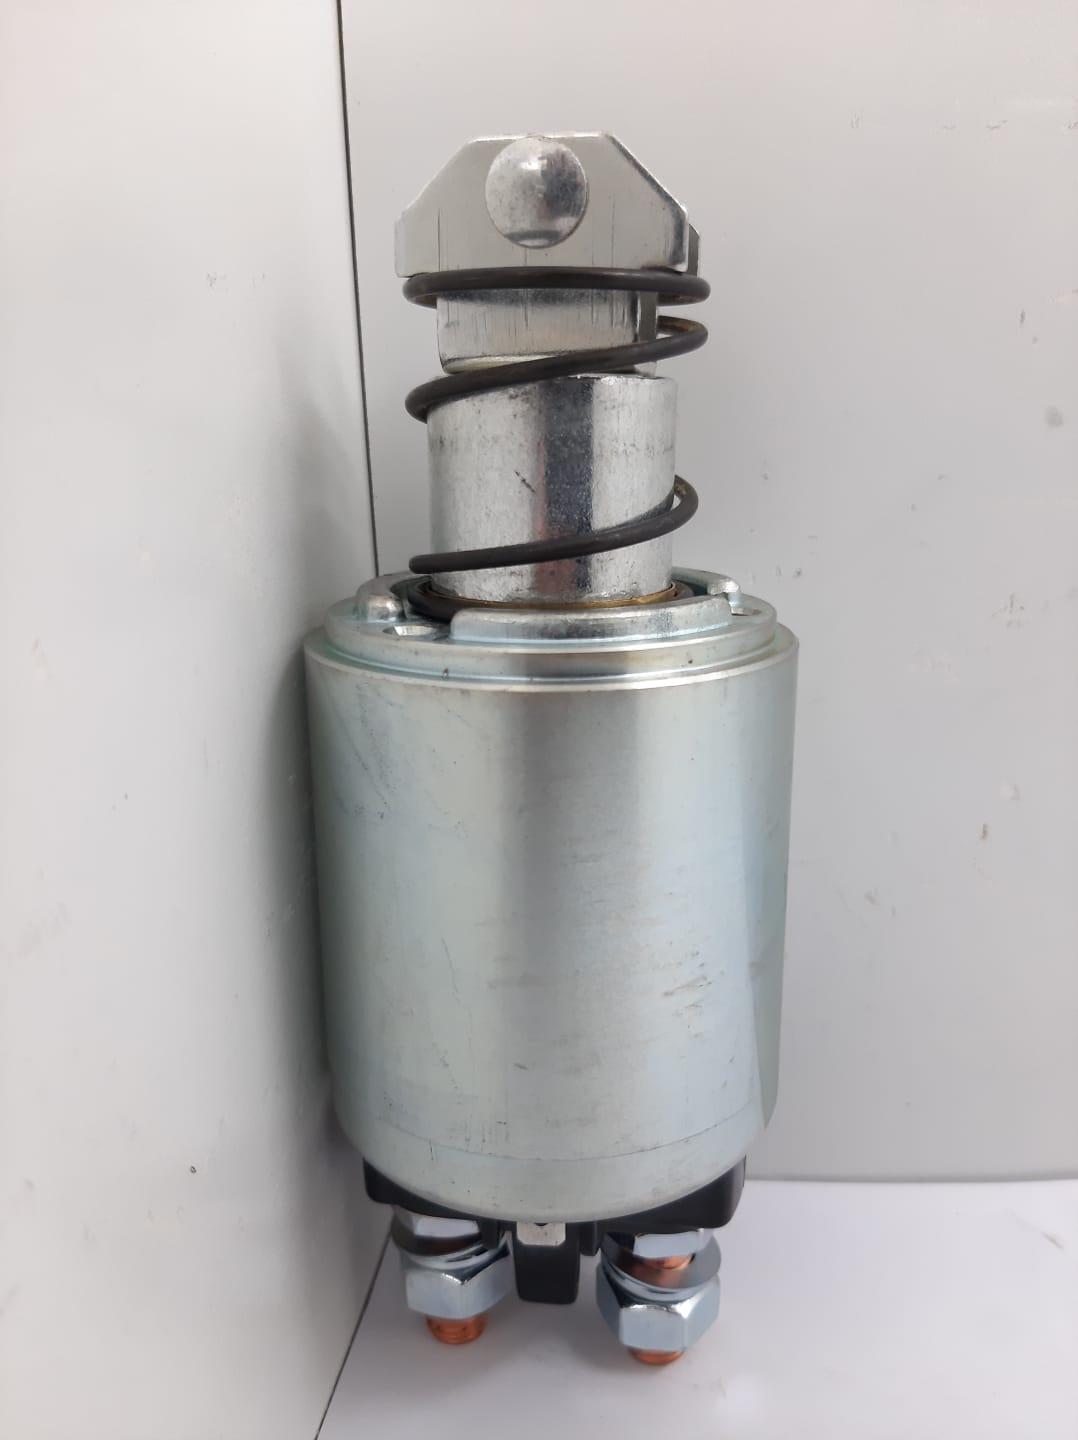 AUTOMATICO 12V FIAT ALLIS FIAT IVECO 63633801 63633806 63633825 63693801 79036683 85540011 85540221 IE38A IE38AA 79036683 7980335 9936770 9957705 9986144 SL SK6121 SL-SK6121 ZM-655 ZM655